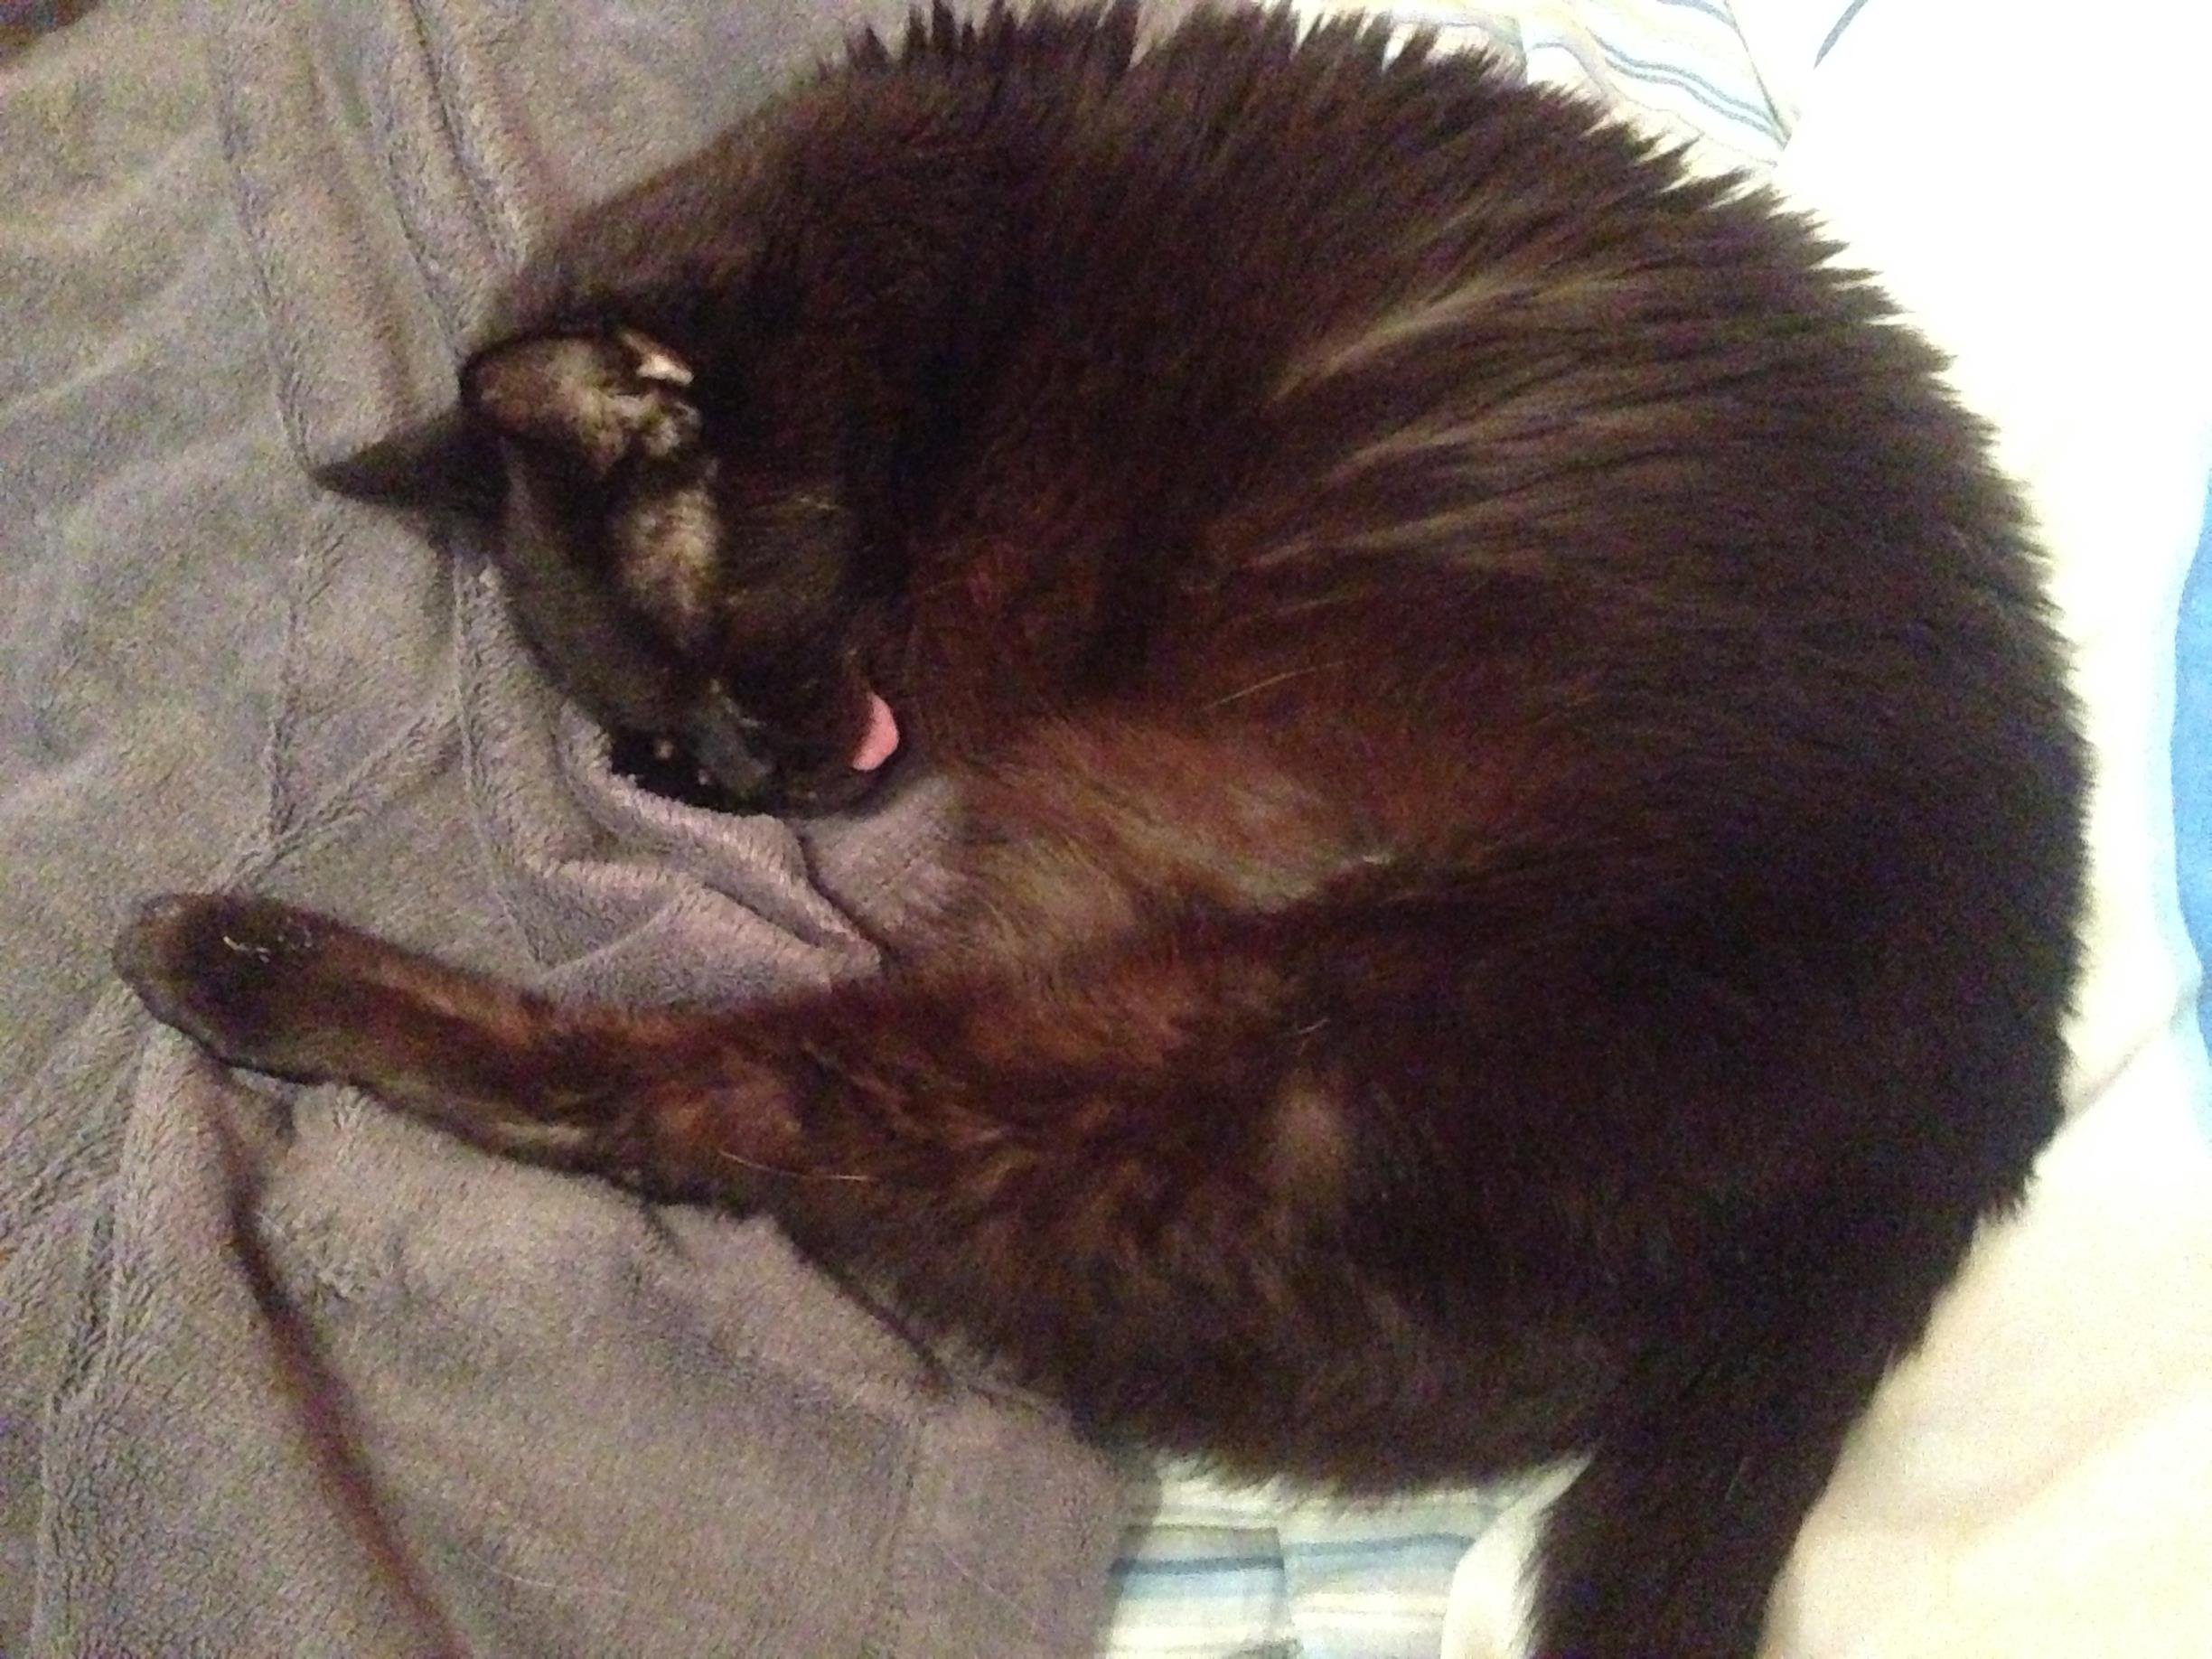 Lefty rocked the "side blep" no teeth so...